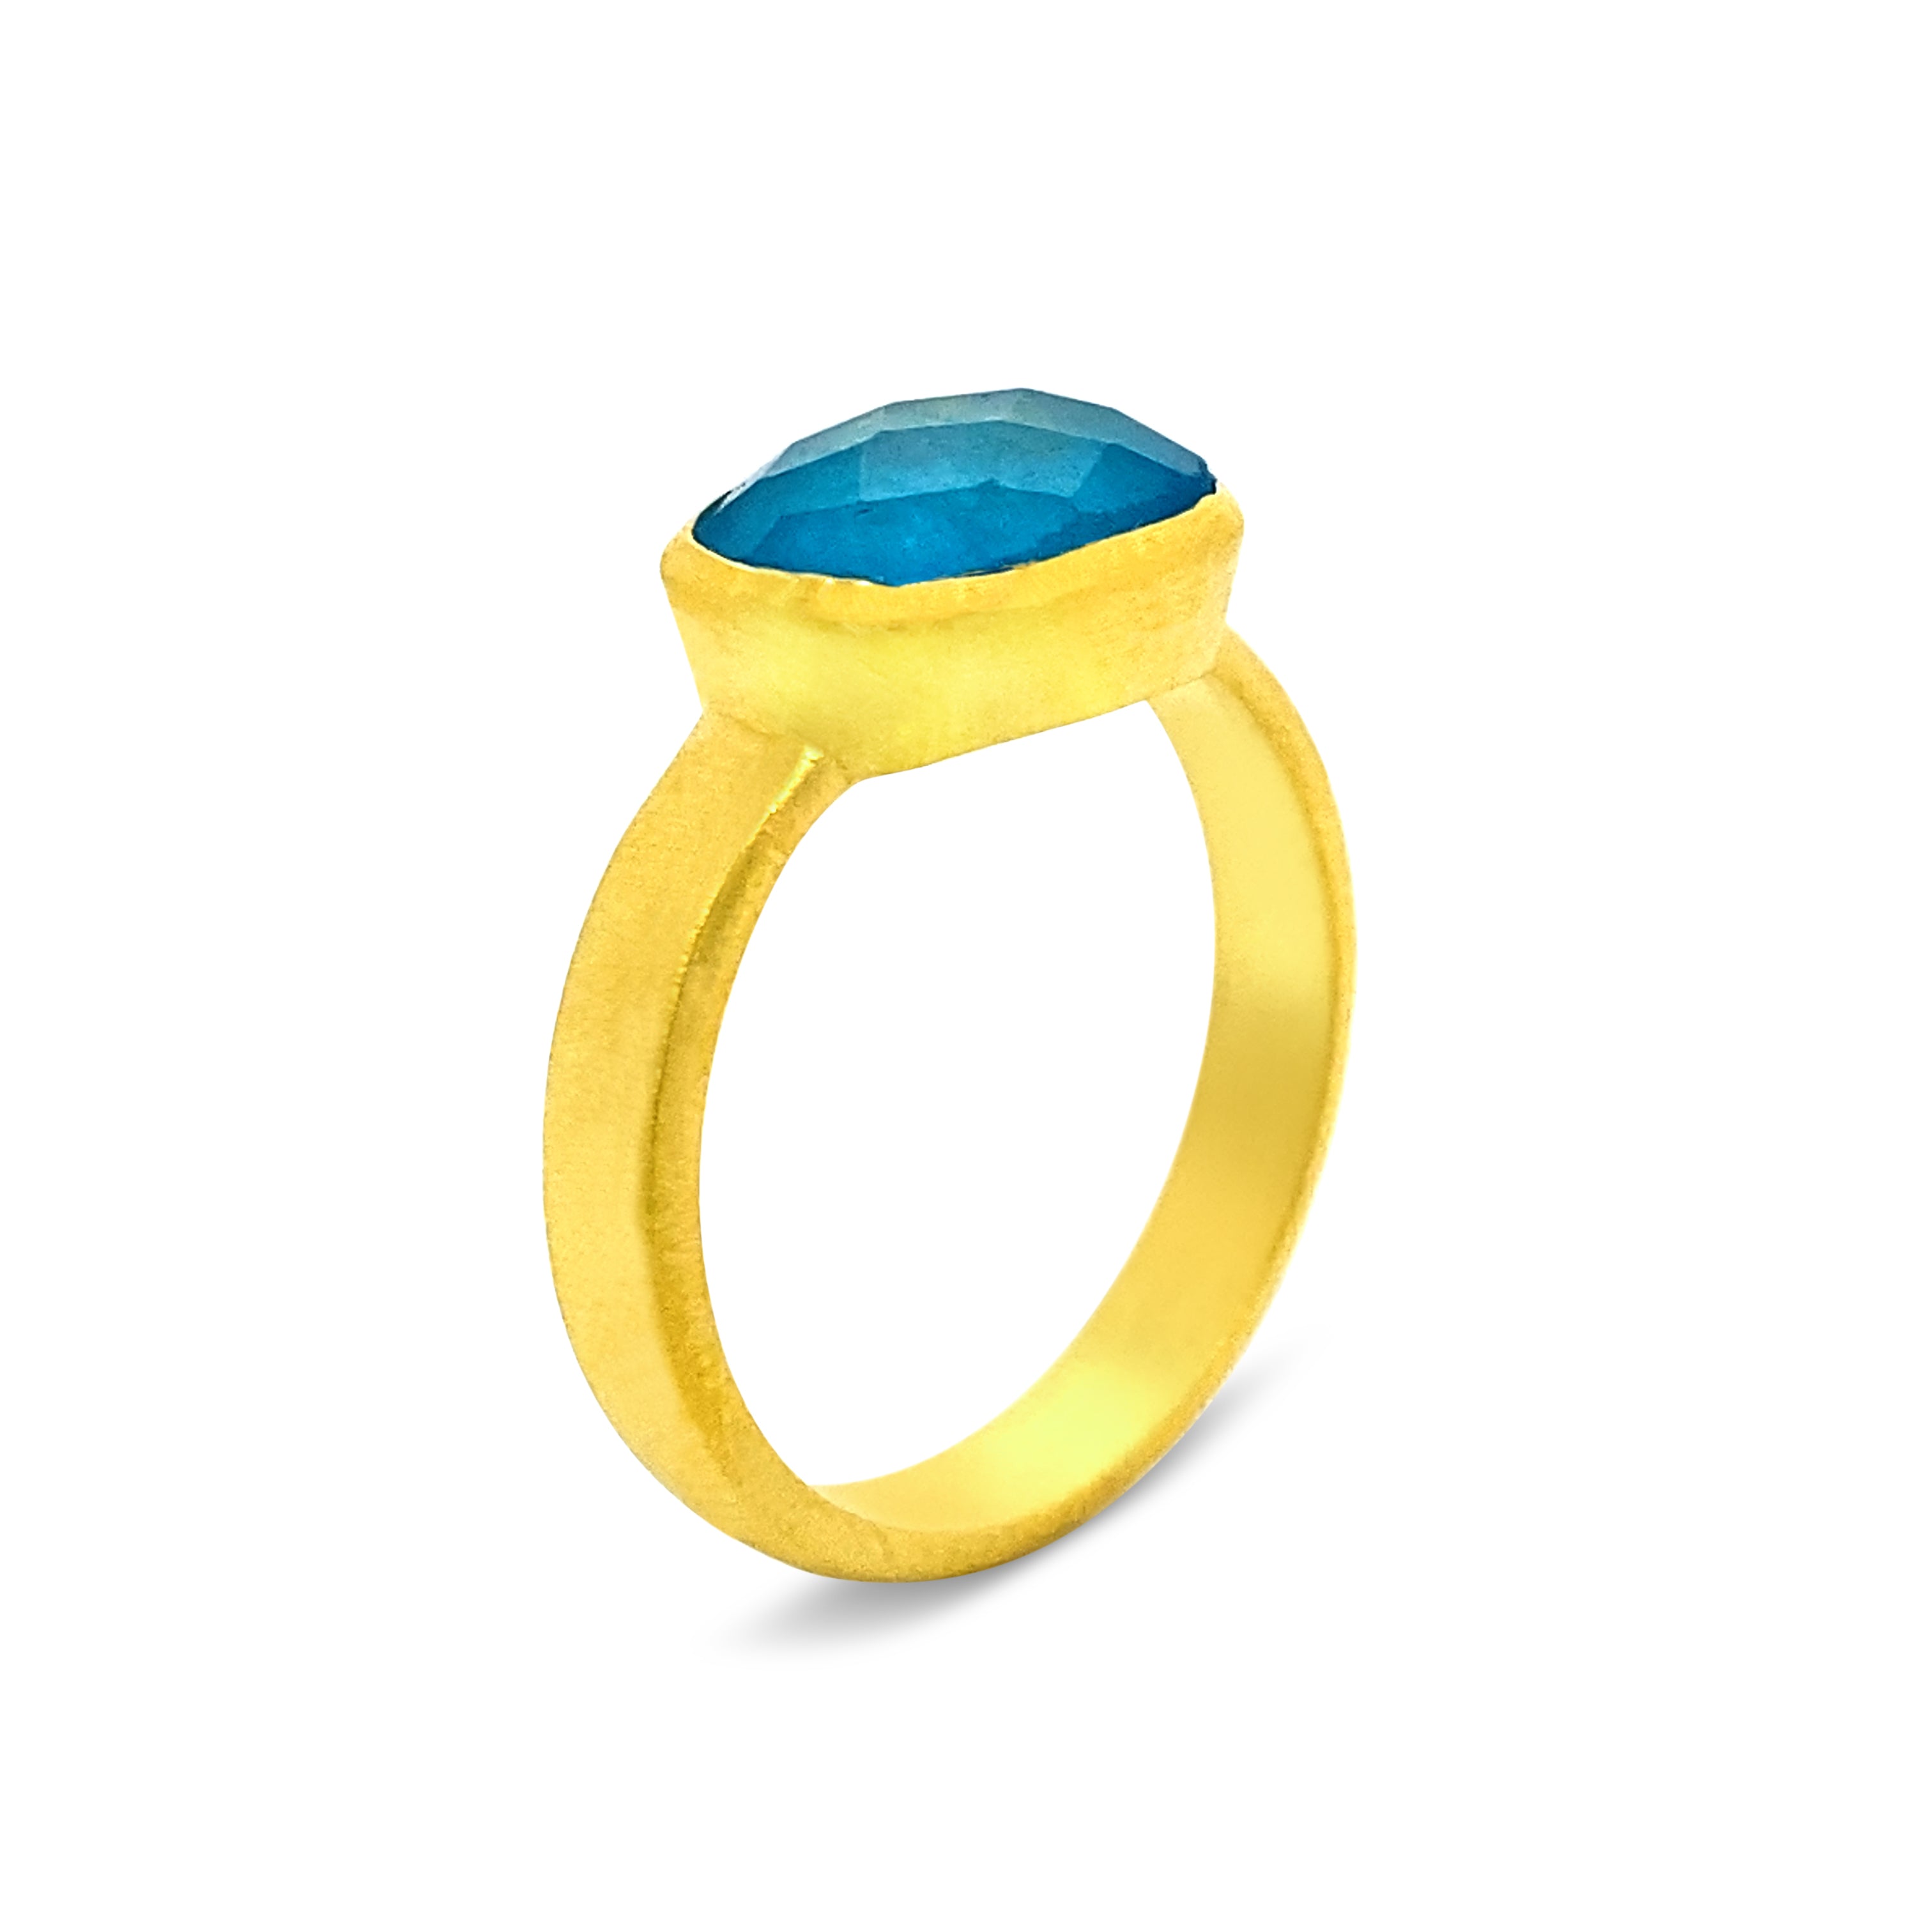 Paradise Ring in Teal